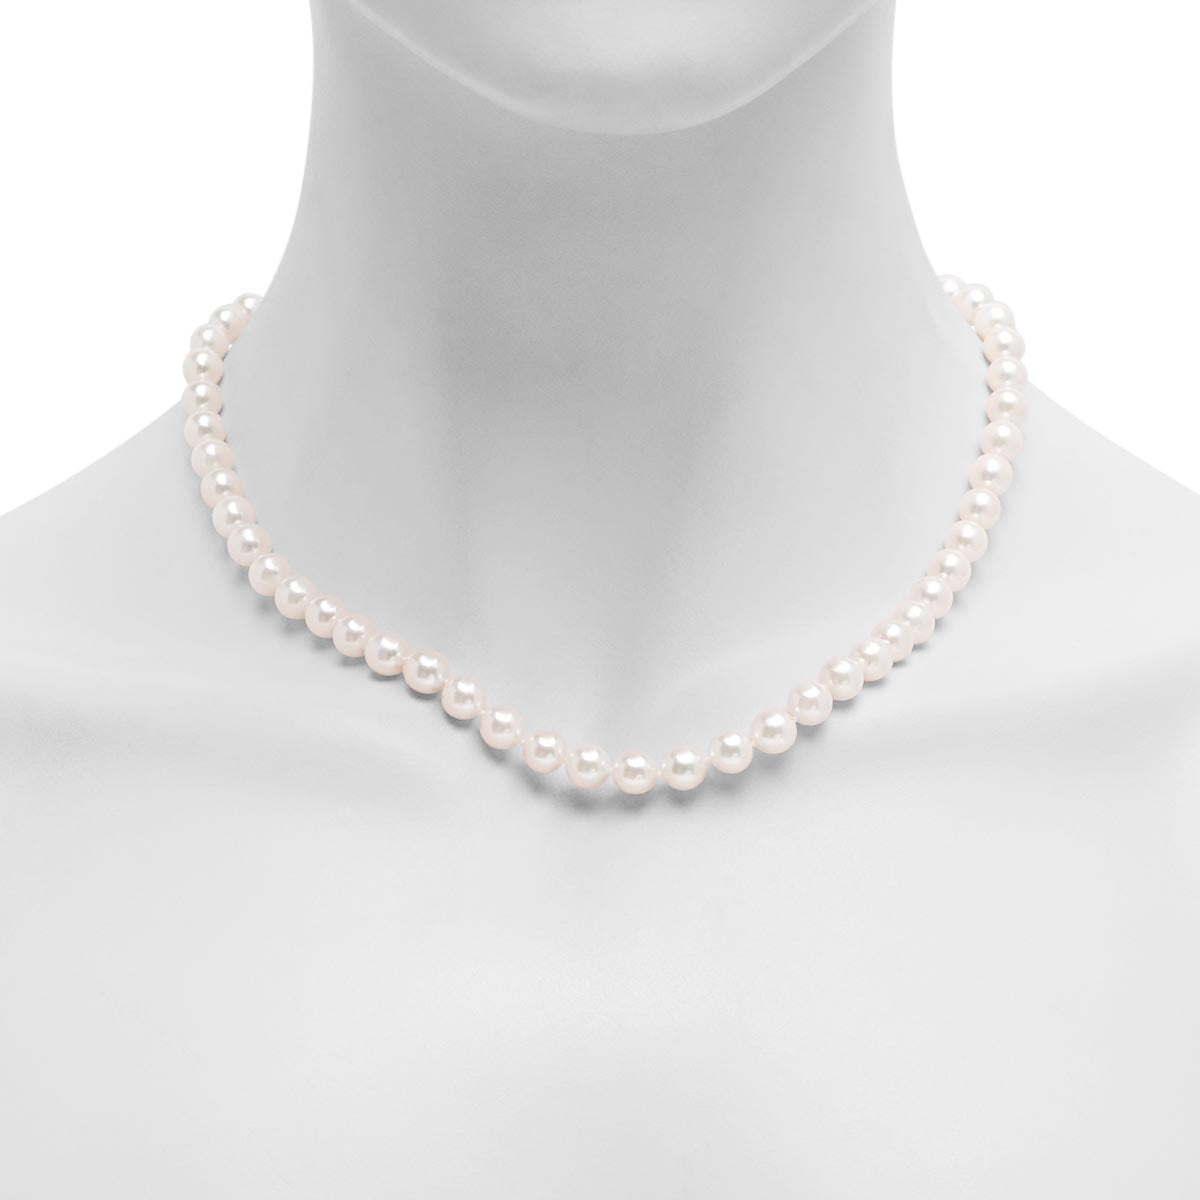 Freshwater Cultured Pearl Necklace in 14kt White Gold (5.5-6mm pearls)